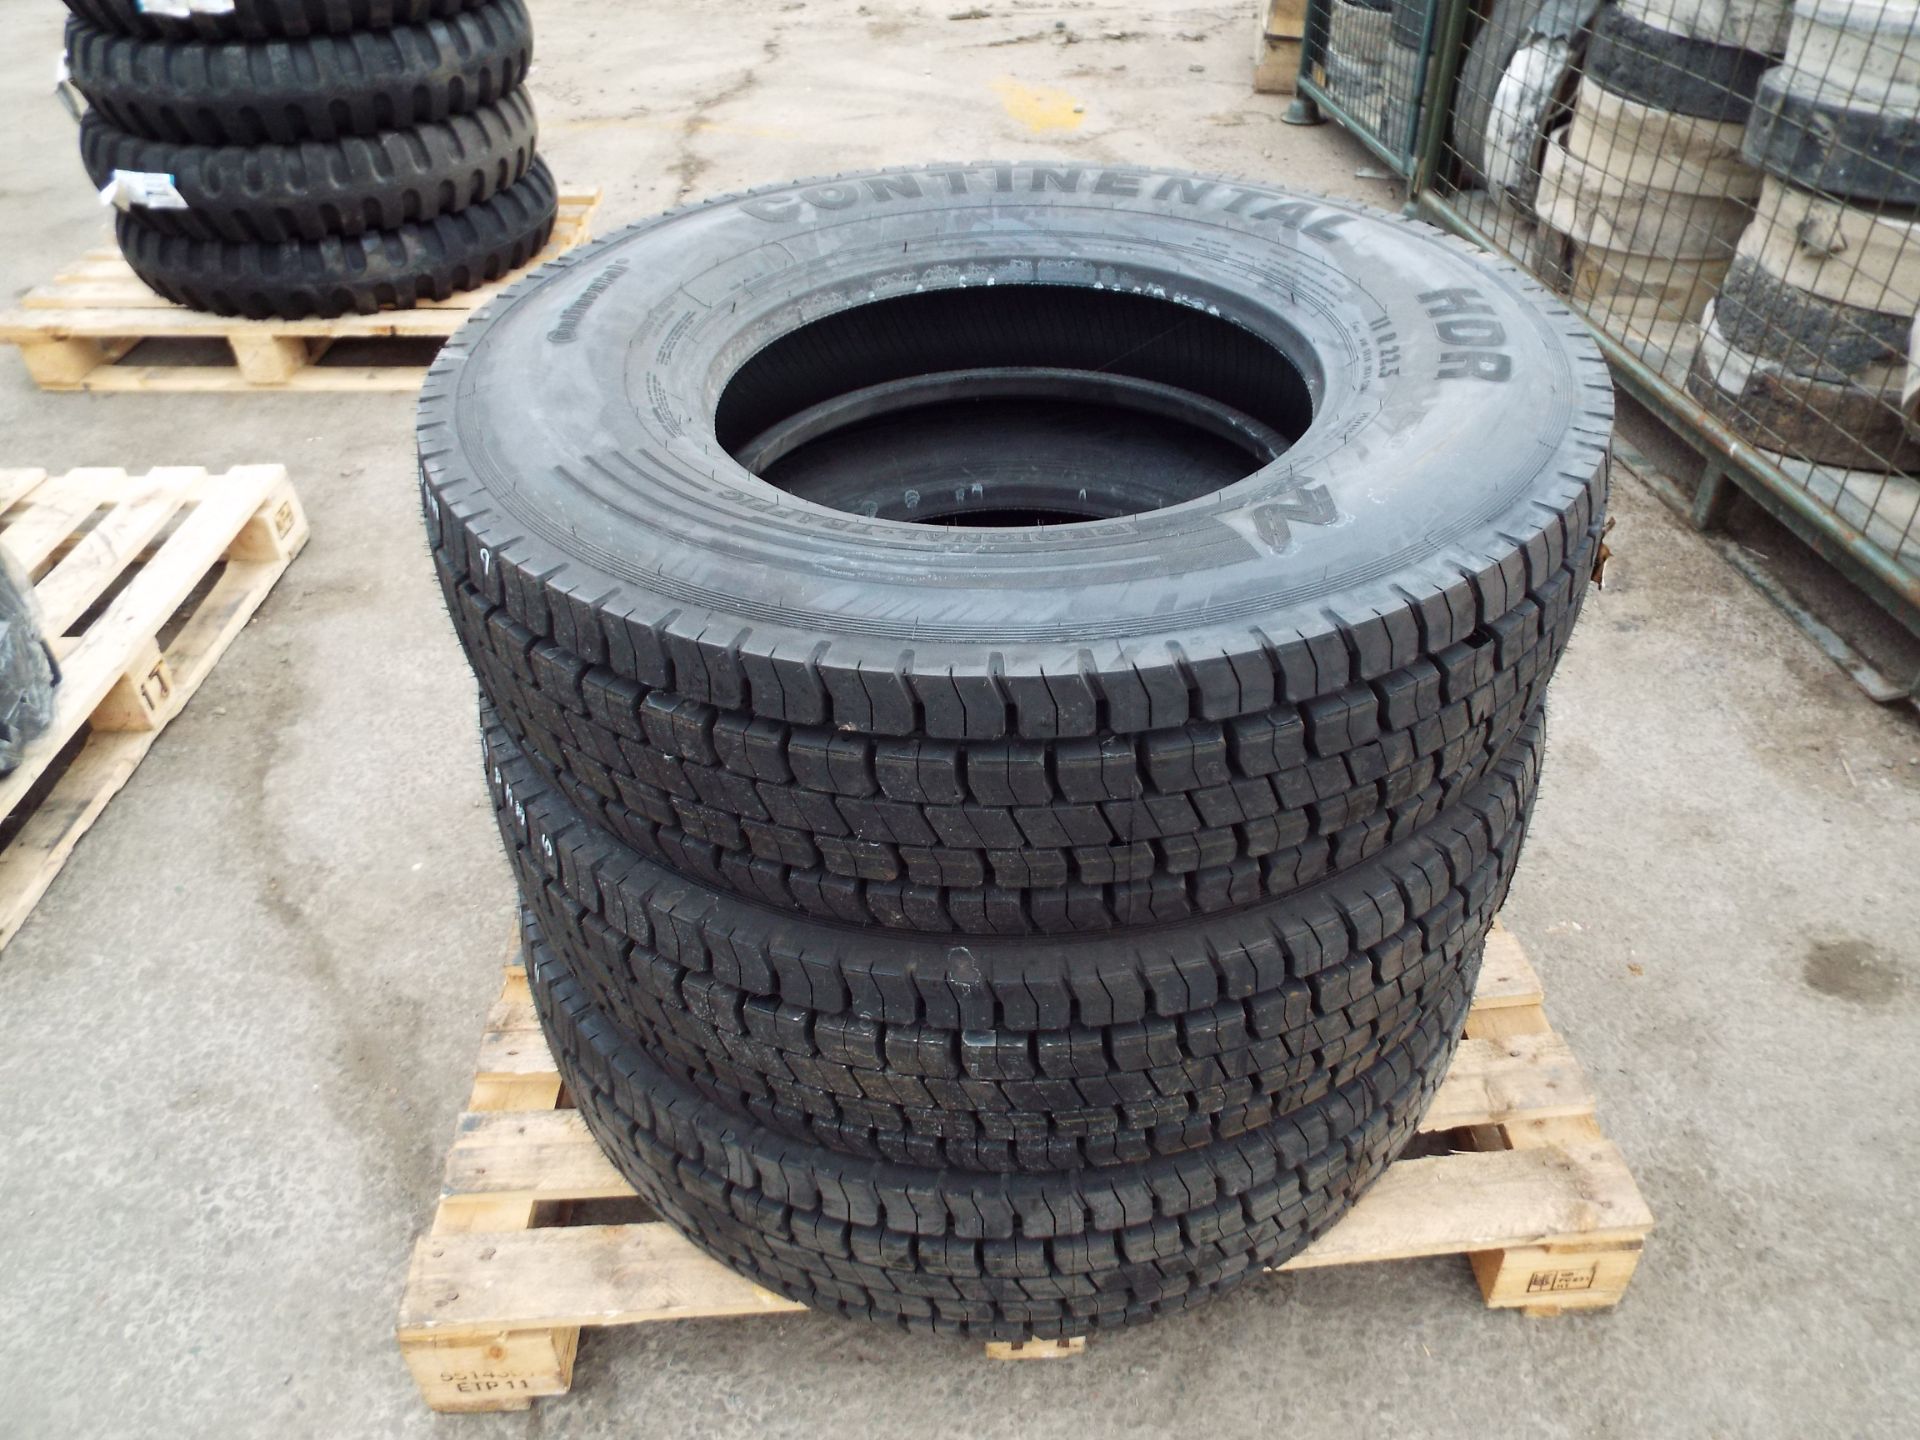 3 x Continental HDR 11 R 22.5 Tyres